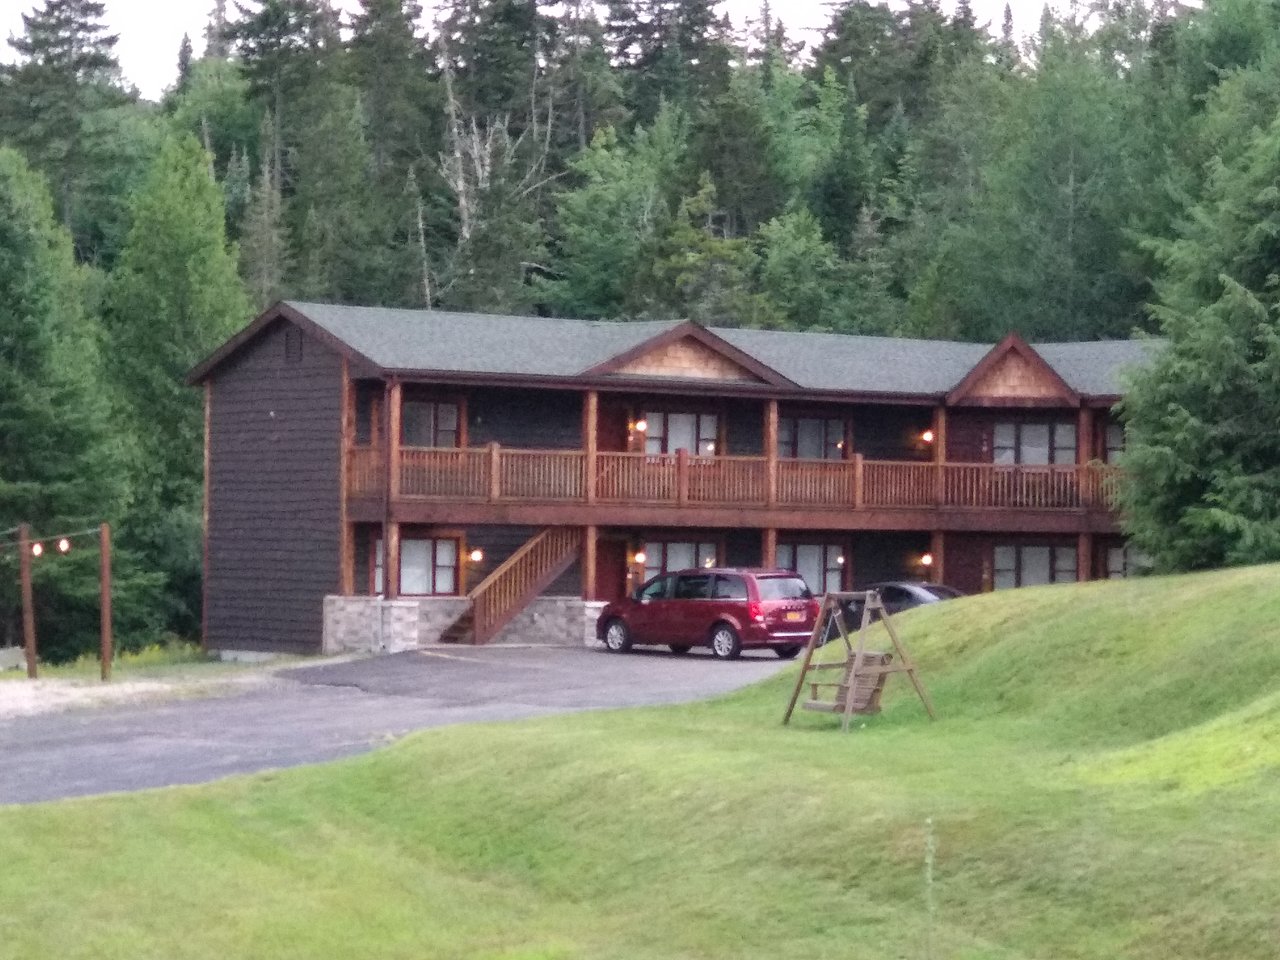 Hydrotherapy in the Woods: Relaxing and Therapeutic Vacation in Lake Placid Cabins